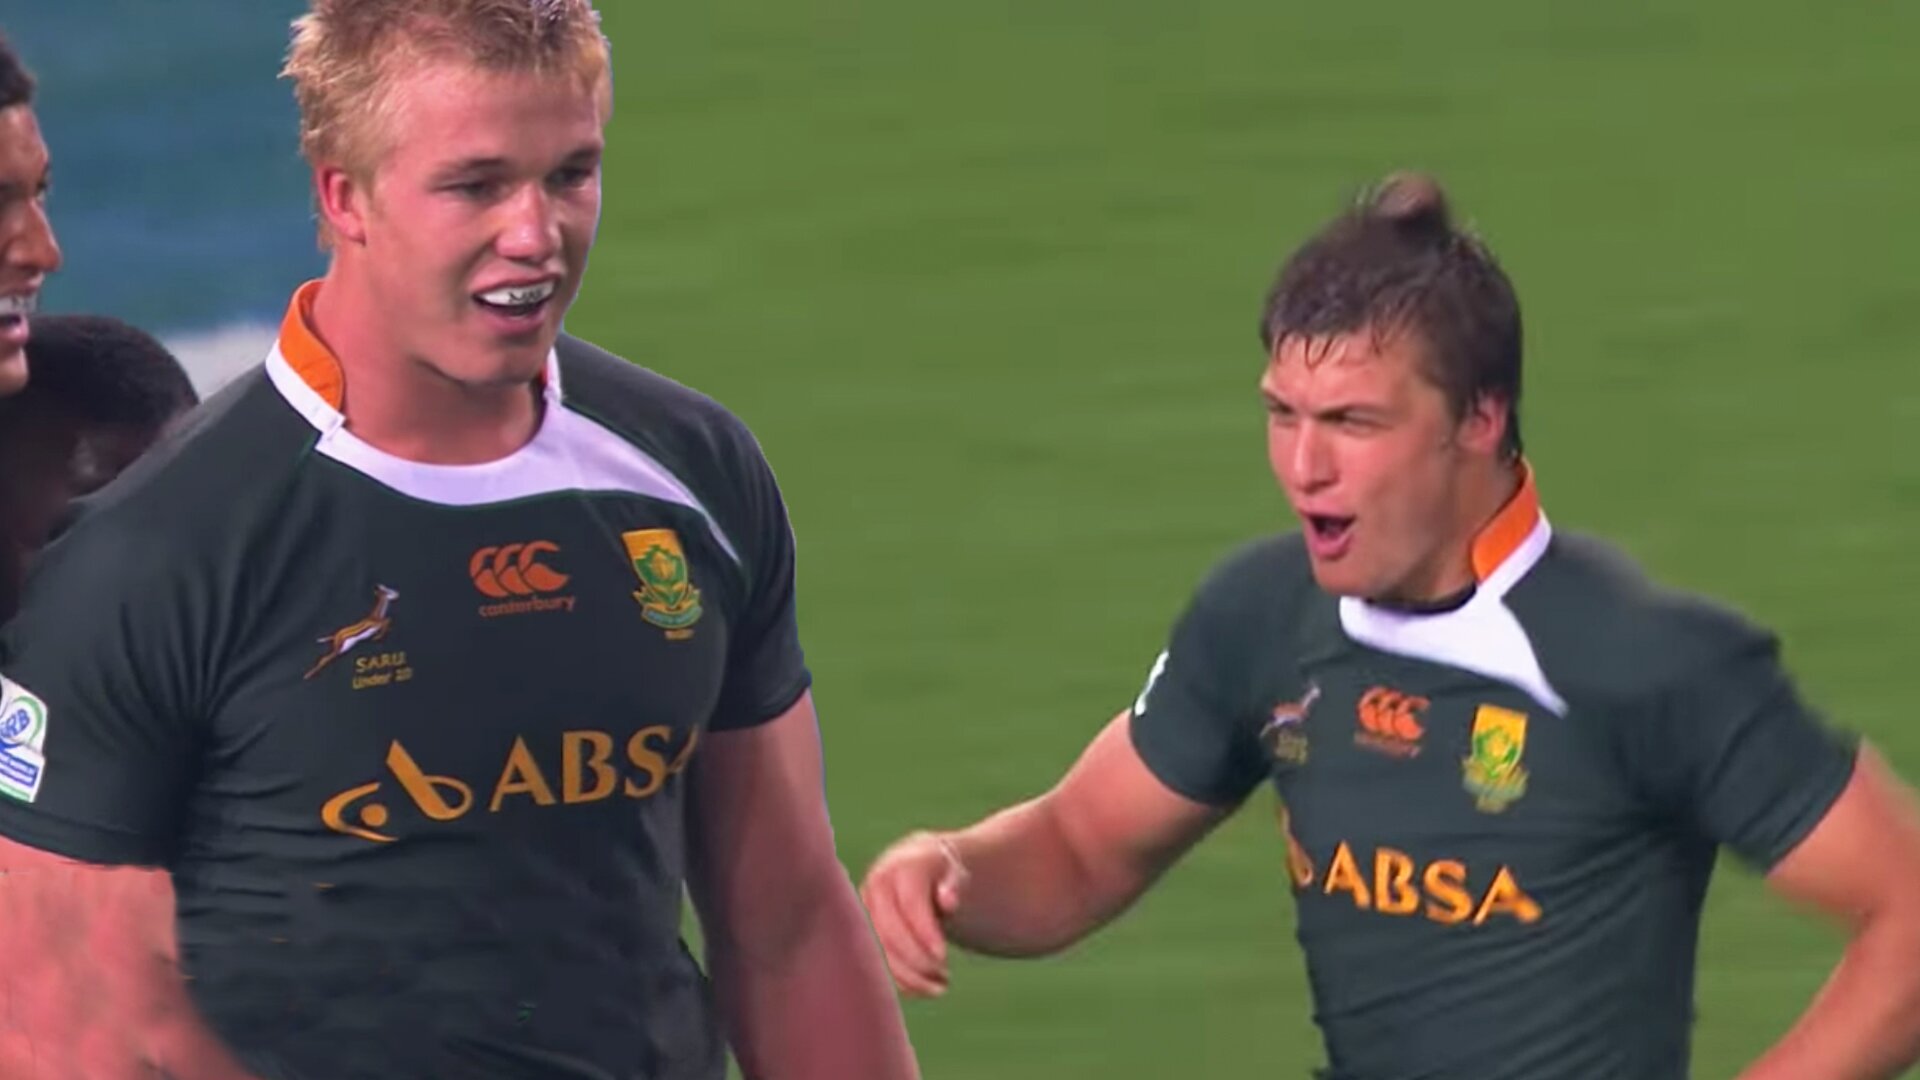 Someone has sent us in footage of South Africa's Junior World Cup team in 2012 and it's outstanding